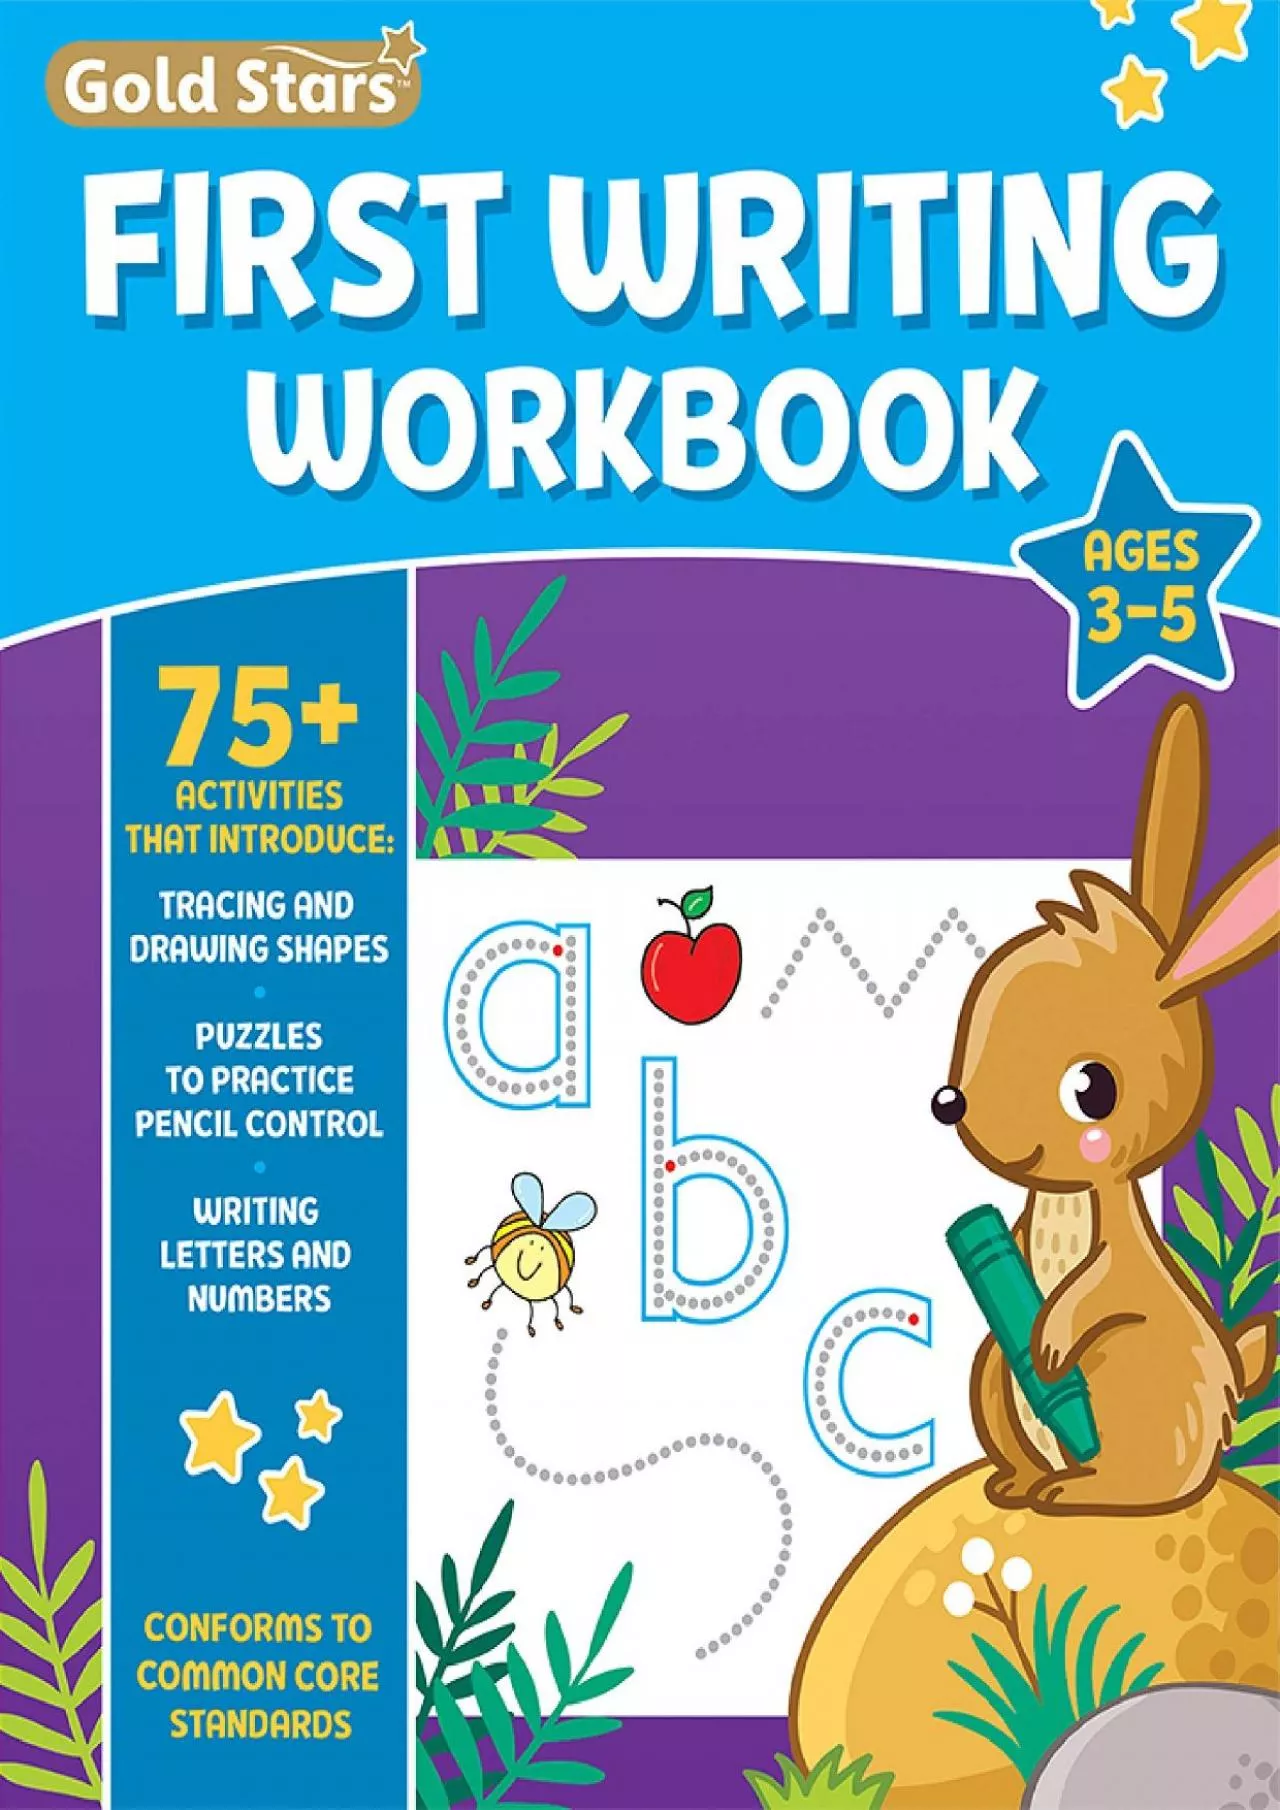 [DOWNLOAD] First Writing Workbook for Ages 3-5 with 75+ Activities, Learn to Write, Tracing,